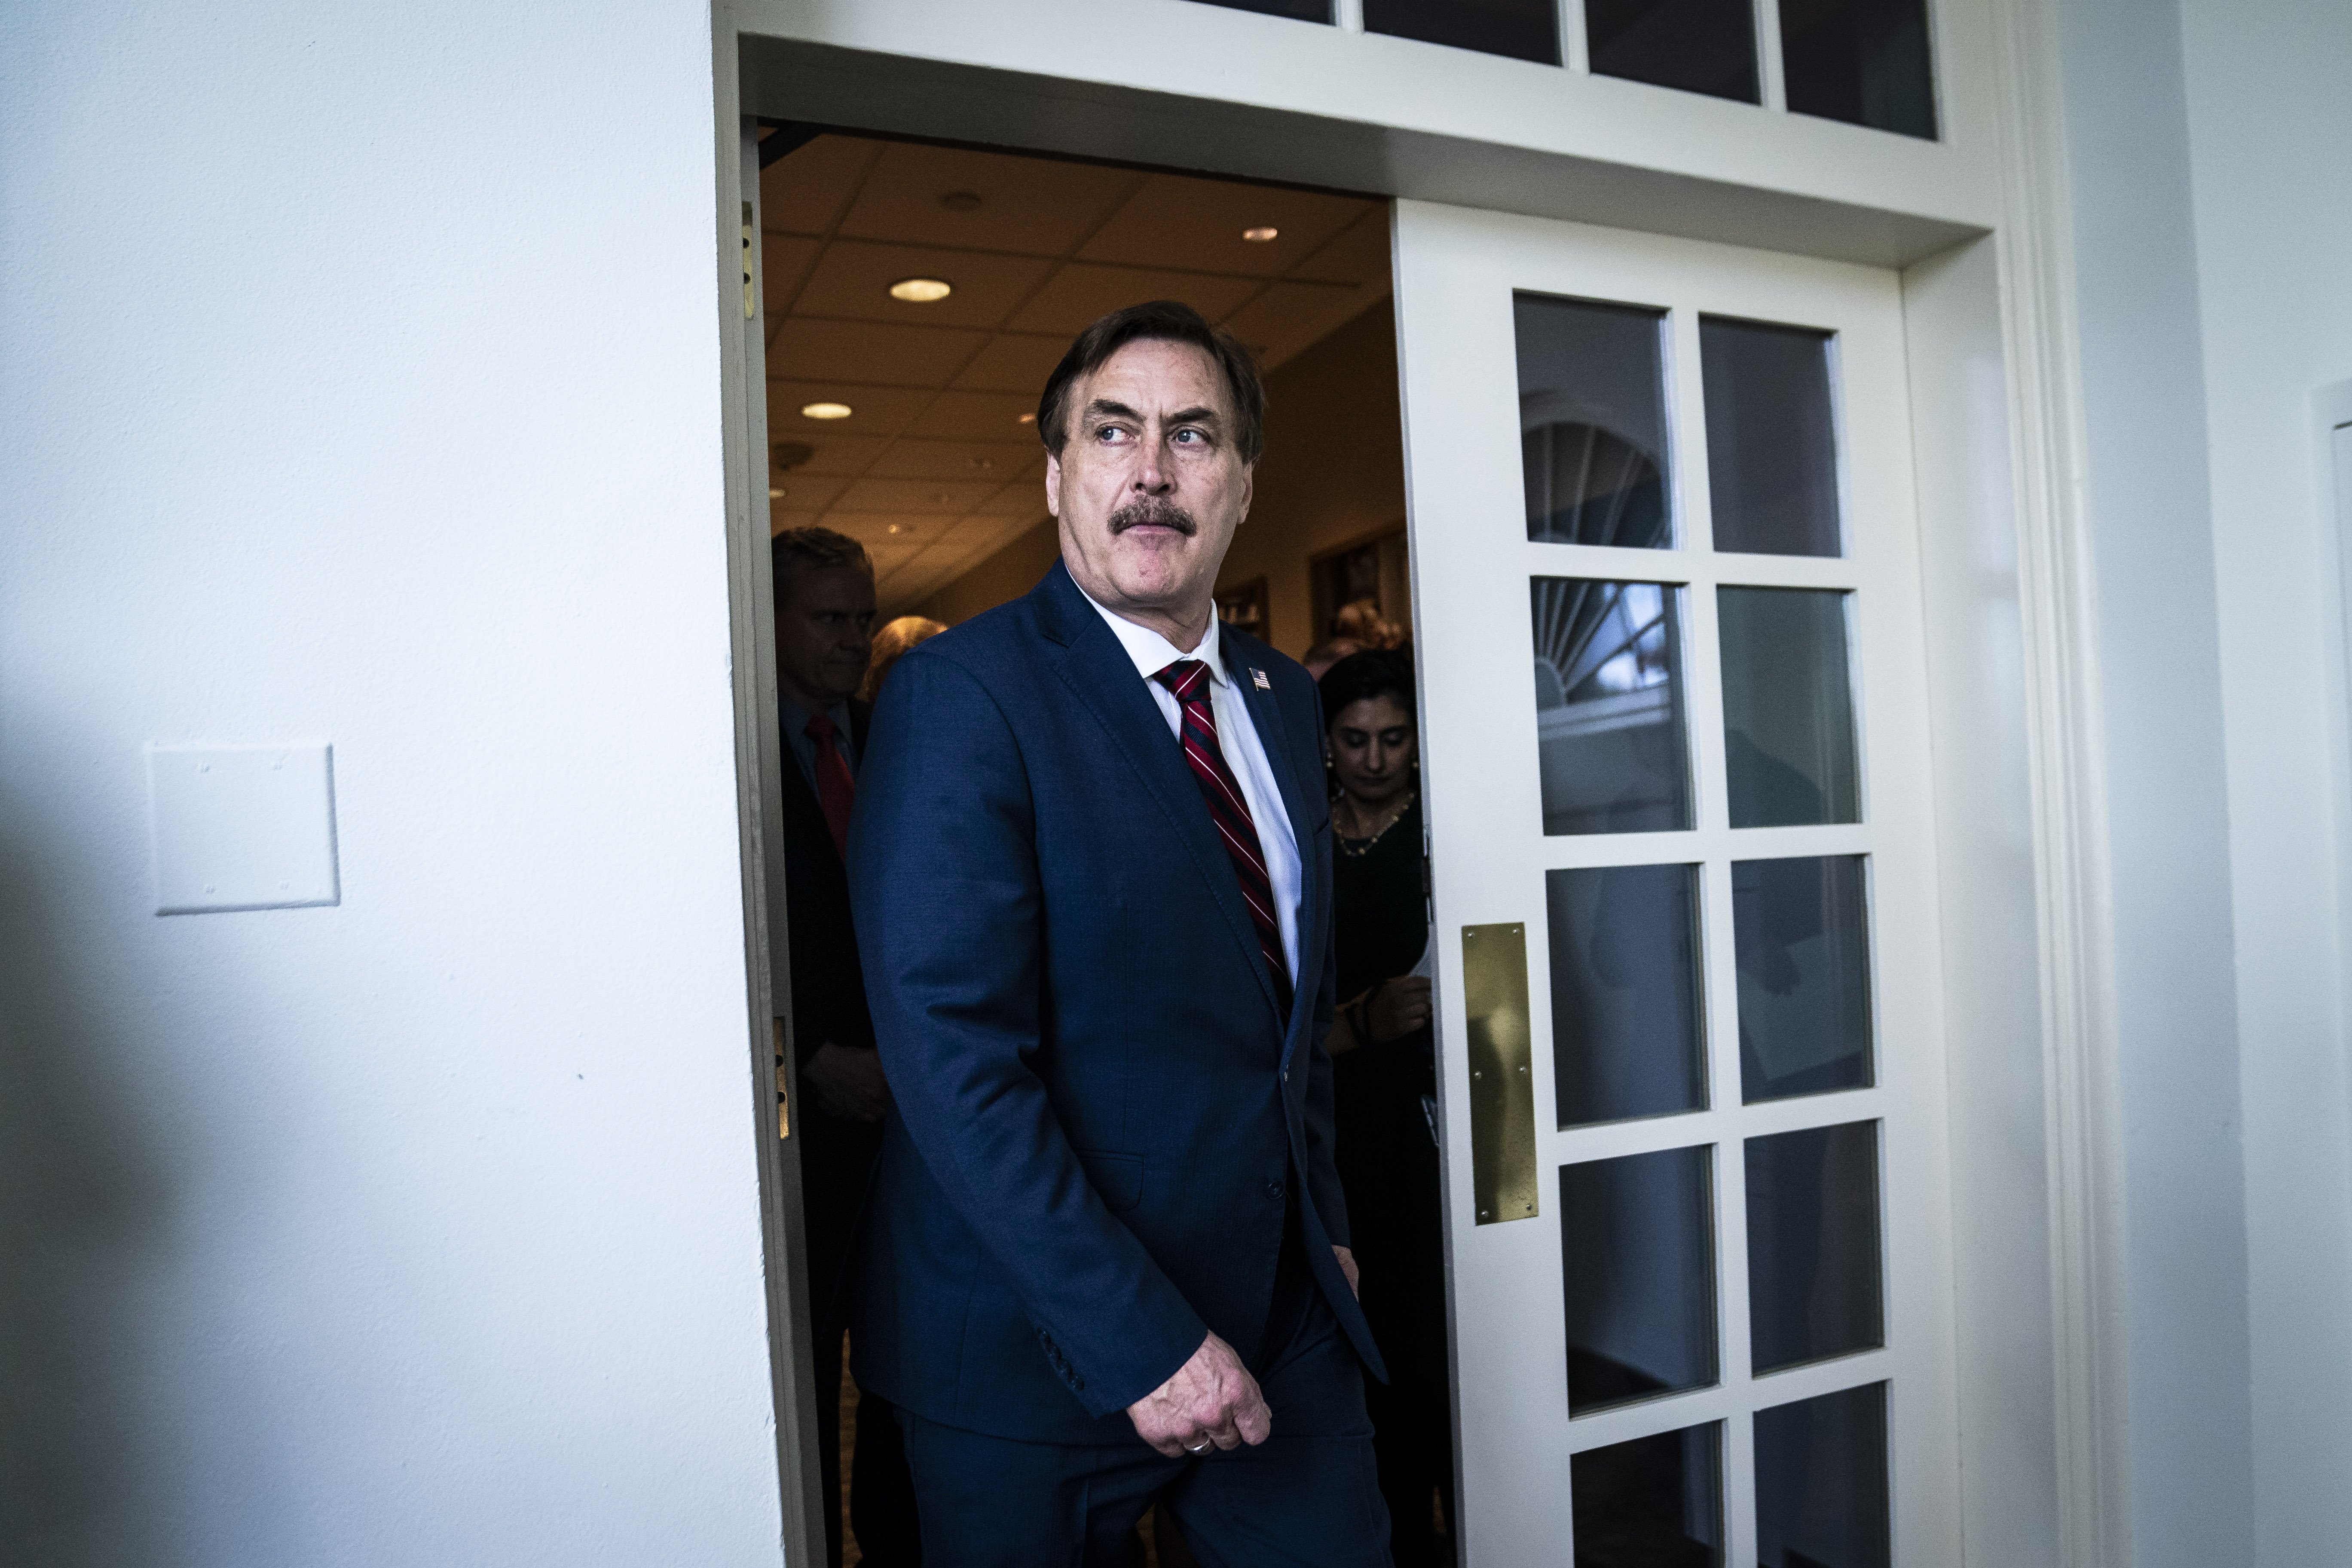 Dallas Yocum's ex-husband, Mike Lindell, on March 30, 2020, in Washington, DC | Source: Getty Images 